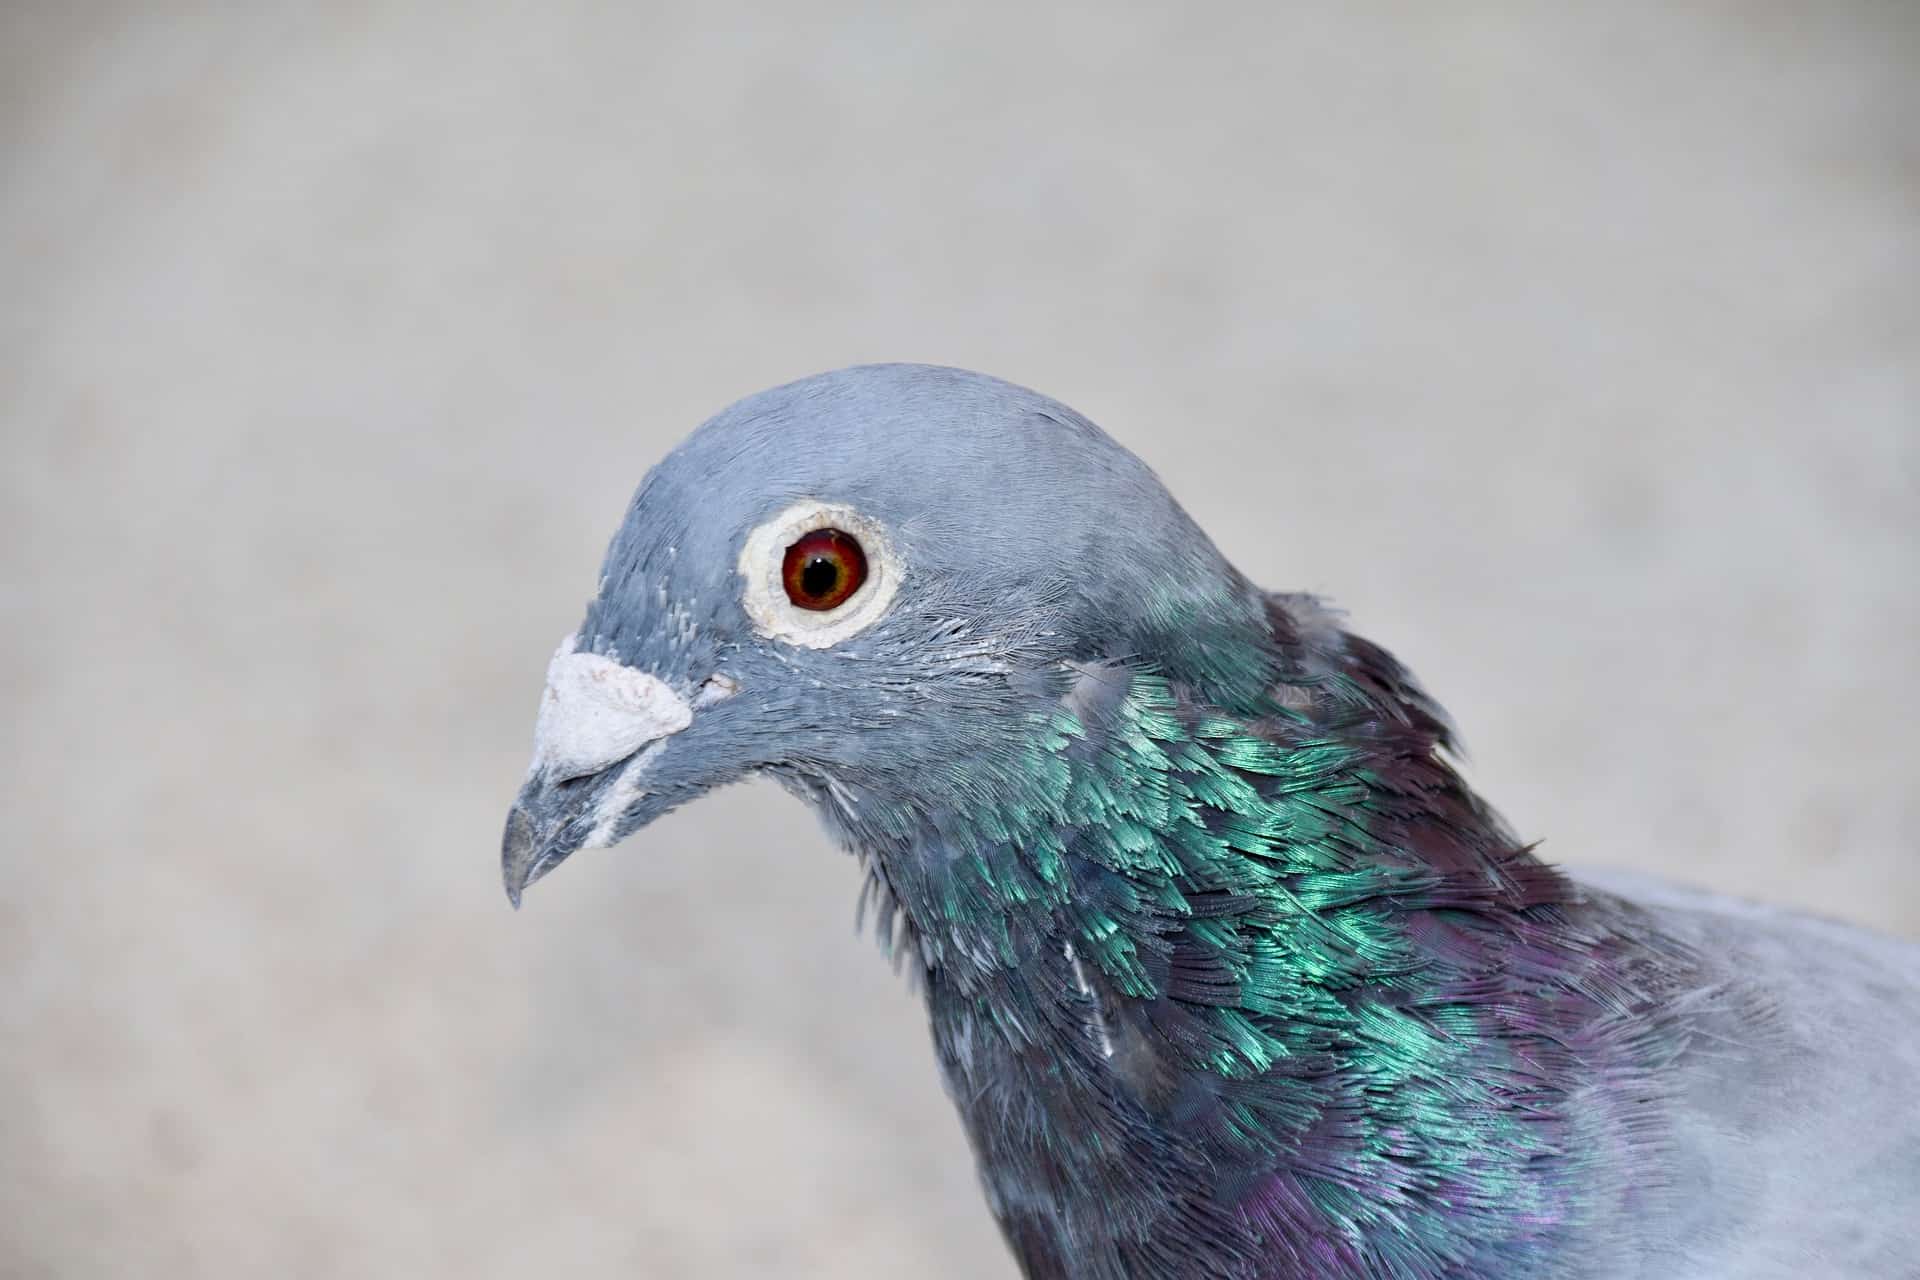 Homing pigeon facts